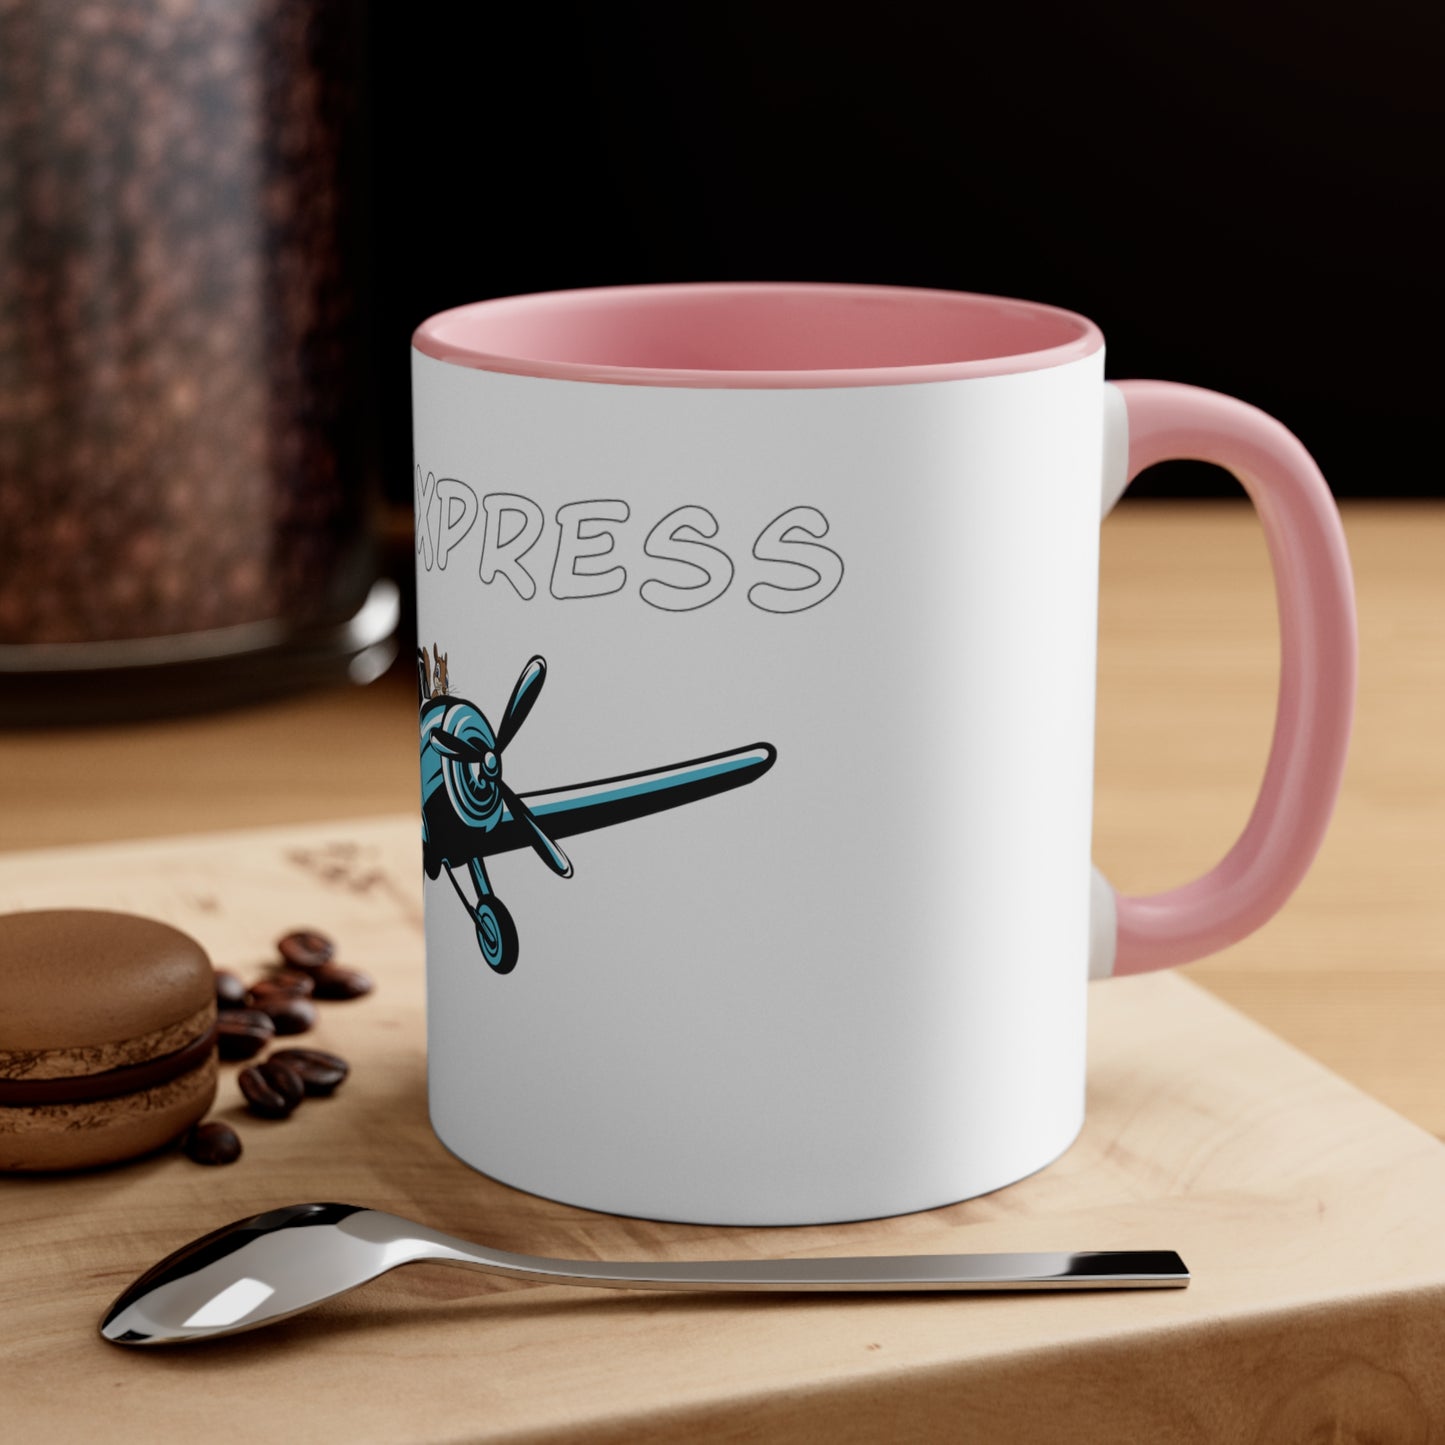 Nutty's Express Delivery. Always On-Time. Time Coffee Mug, 11oz